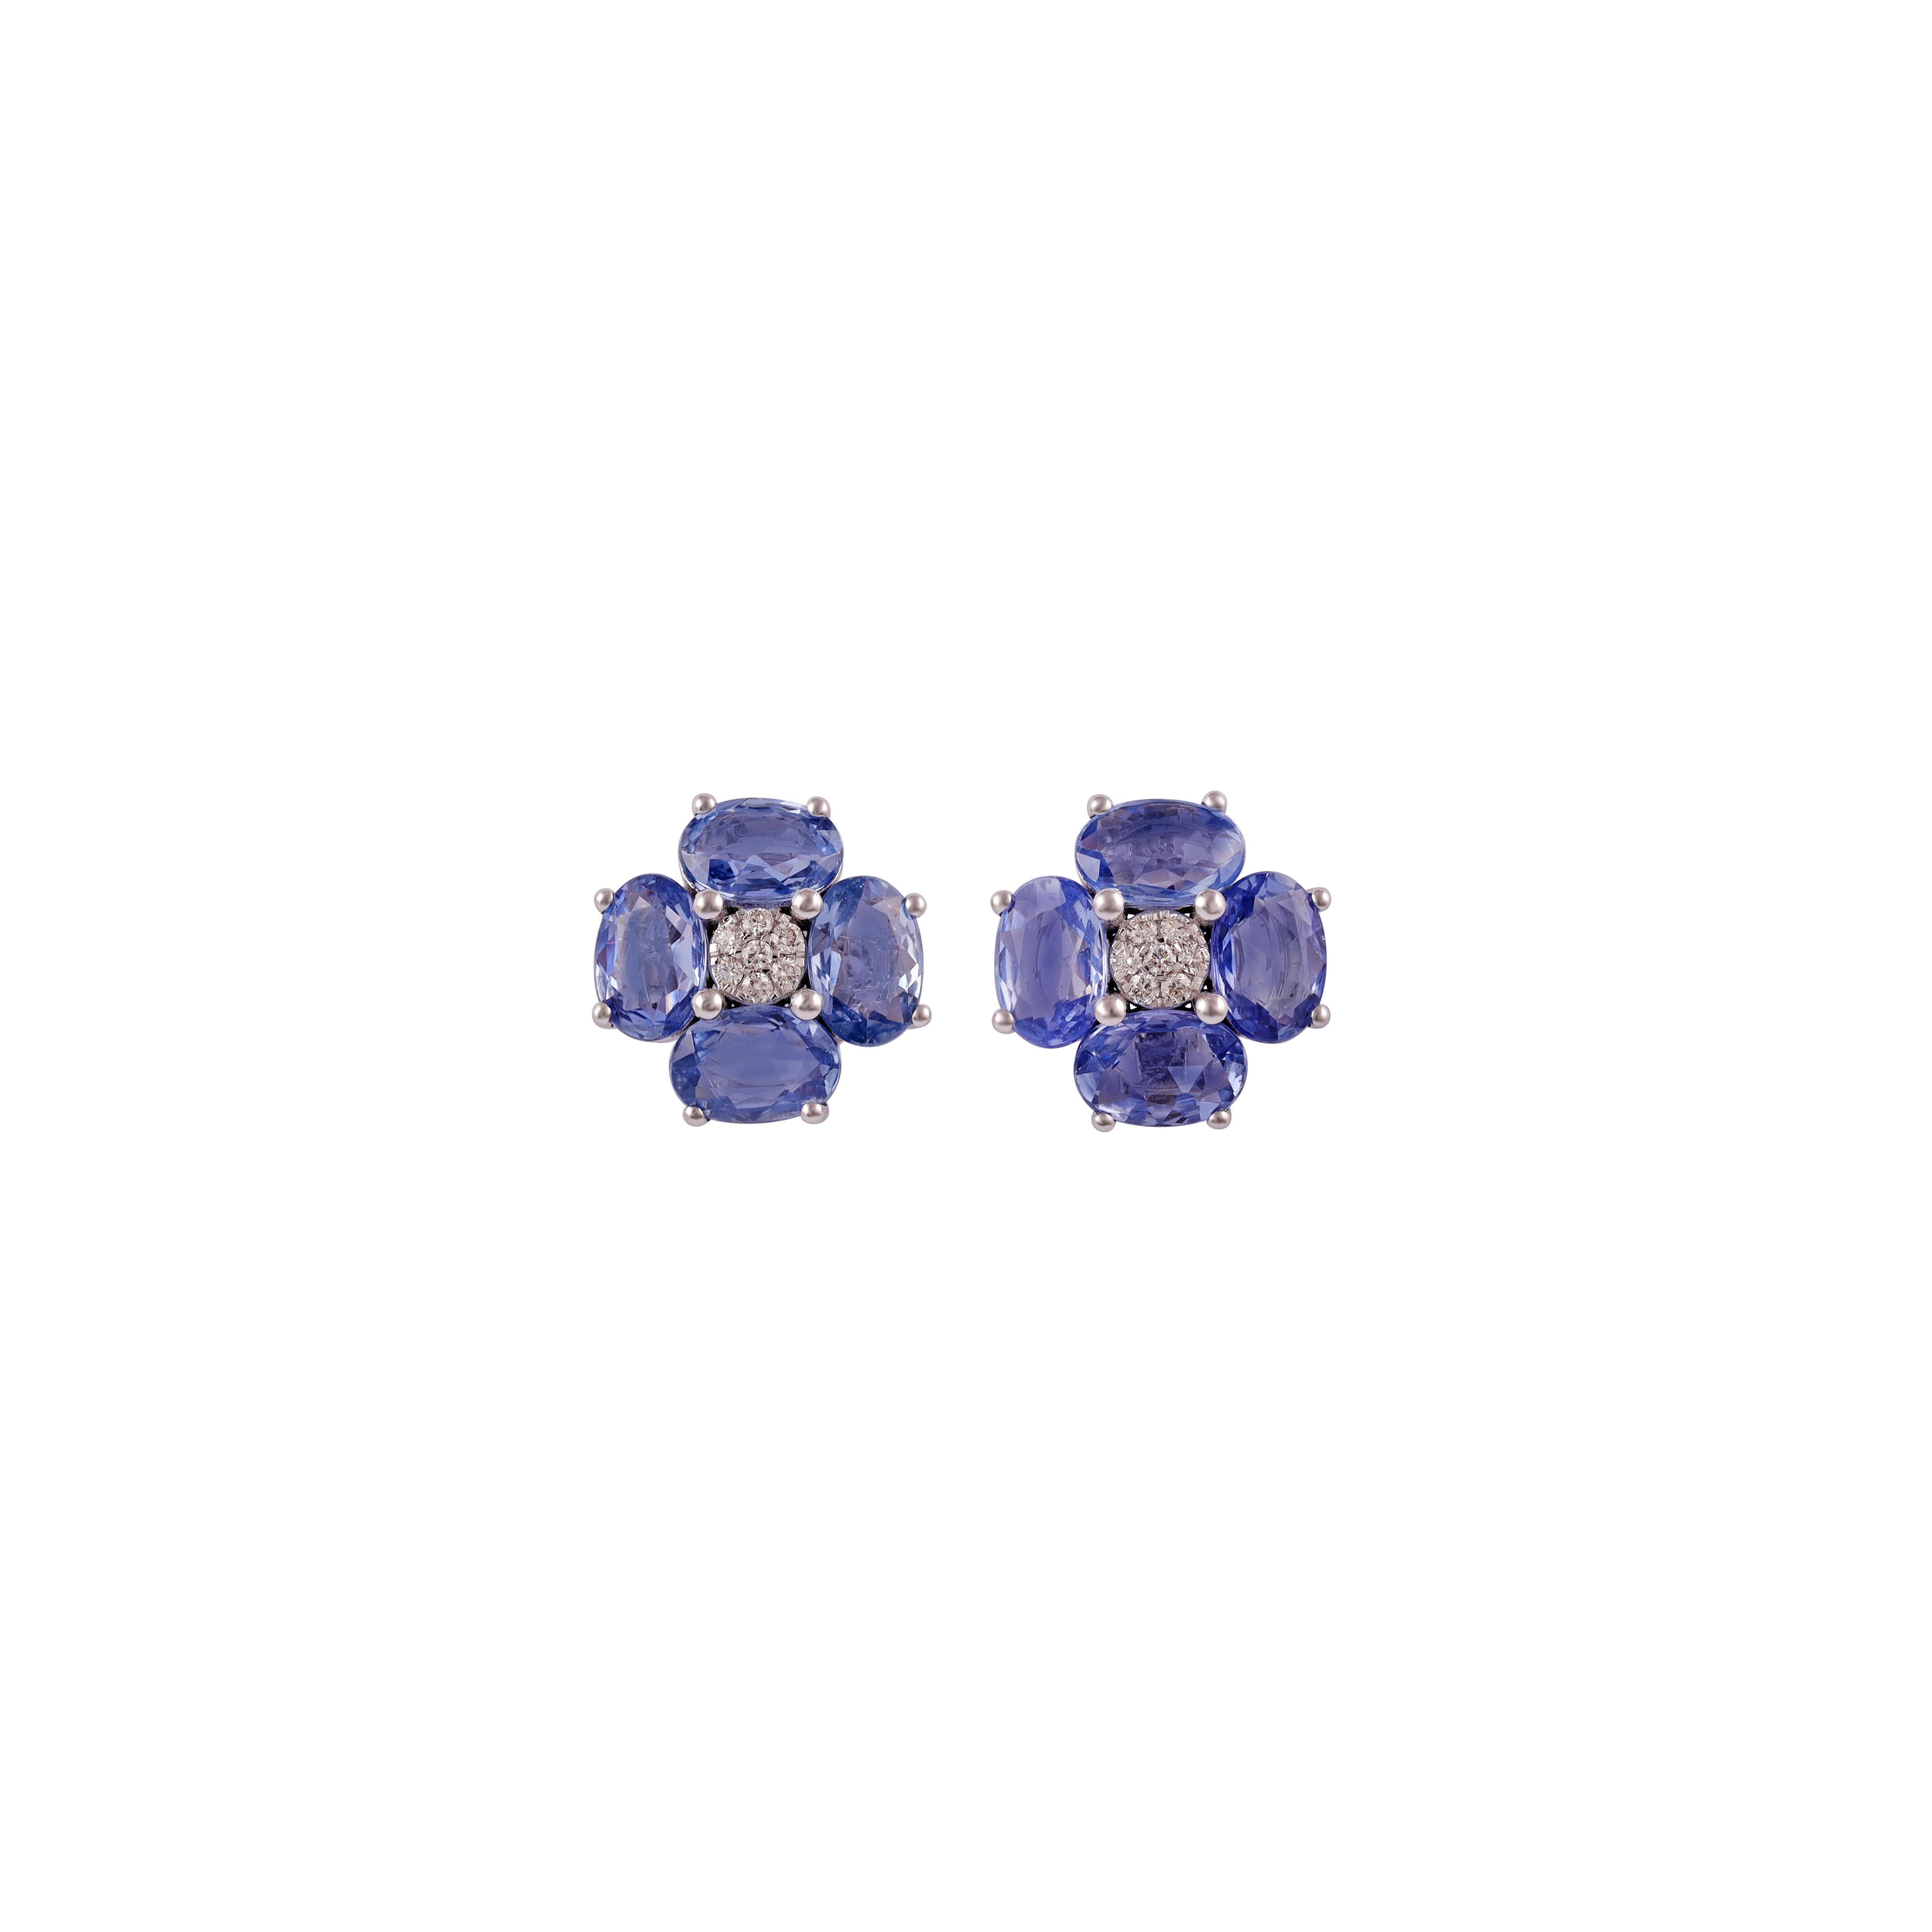 Elegant blue sapphire stud earrings that are fun to wear. A classic pair of earrings with a designer touch with its setting in White gold, giving it a true royal look.

Blue Sapphire Stud Earrings with Diamond in 18 Karat Yellow Gold

Blue Sapphire: